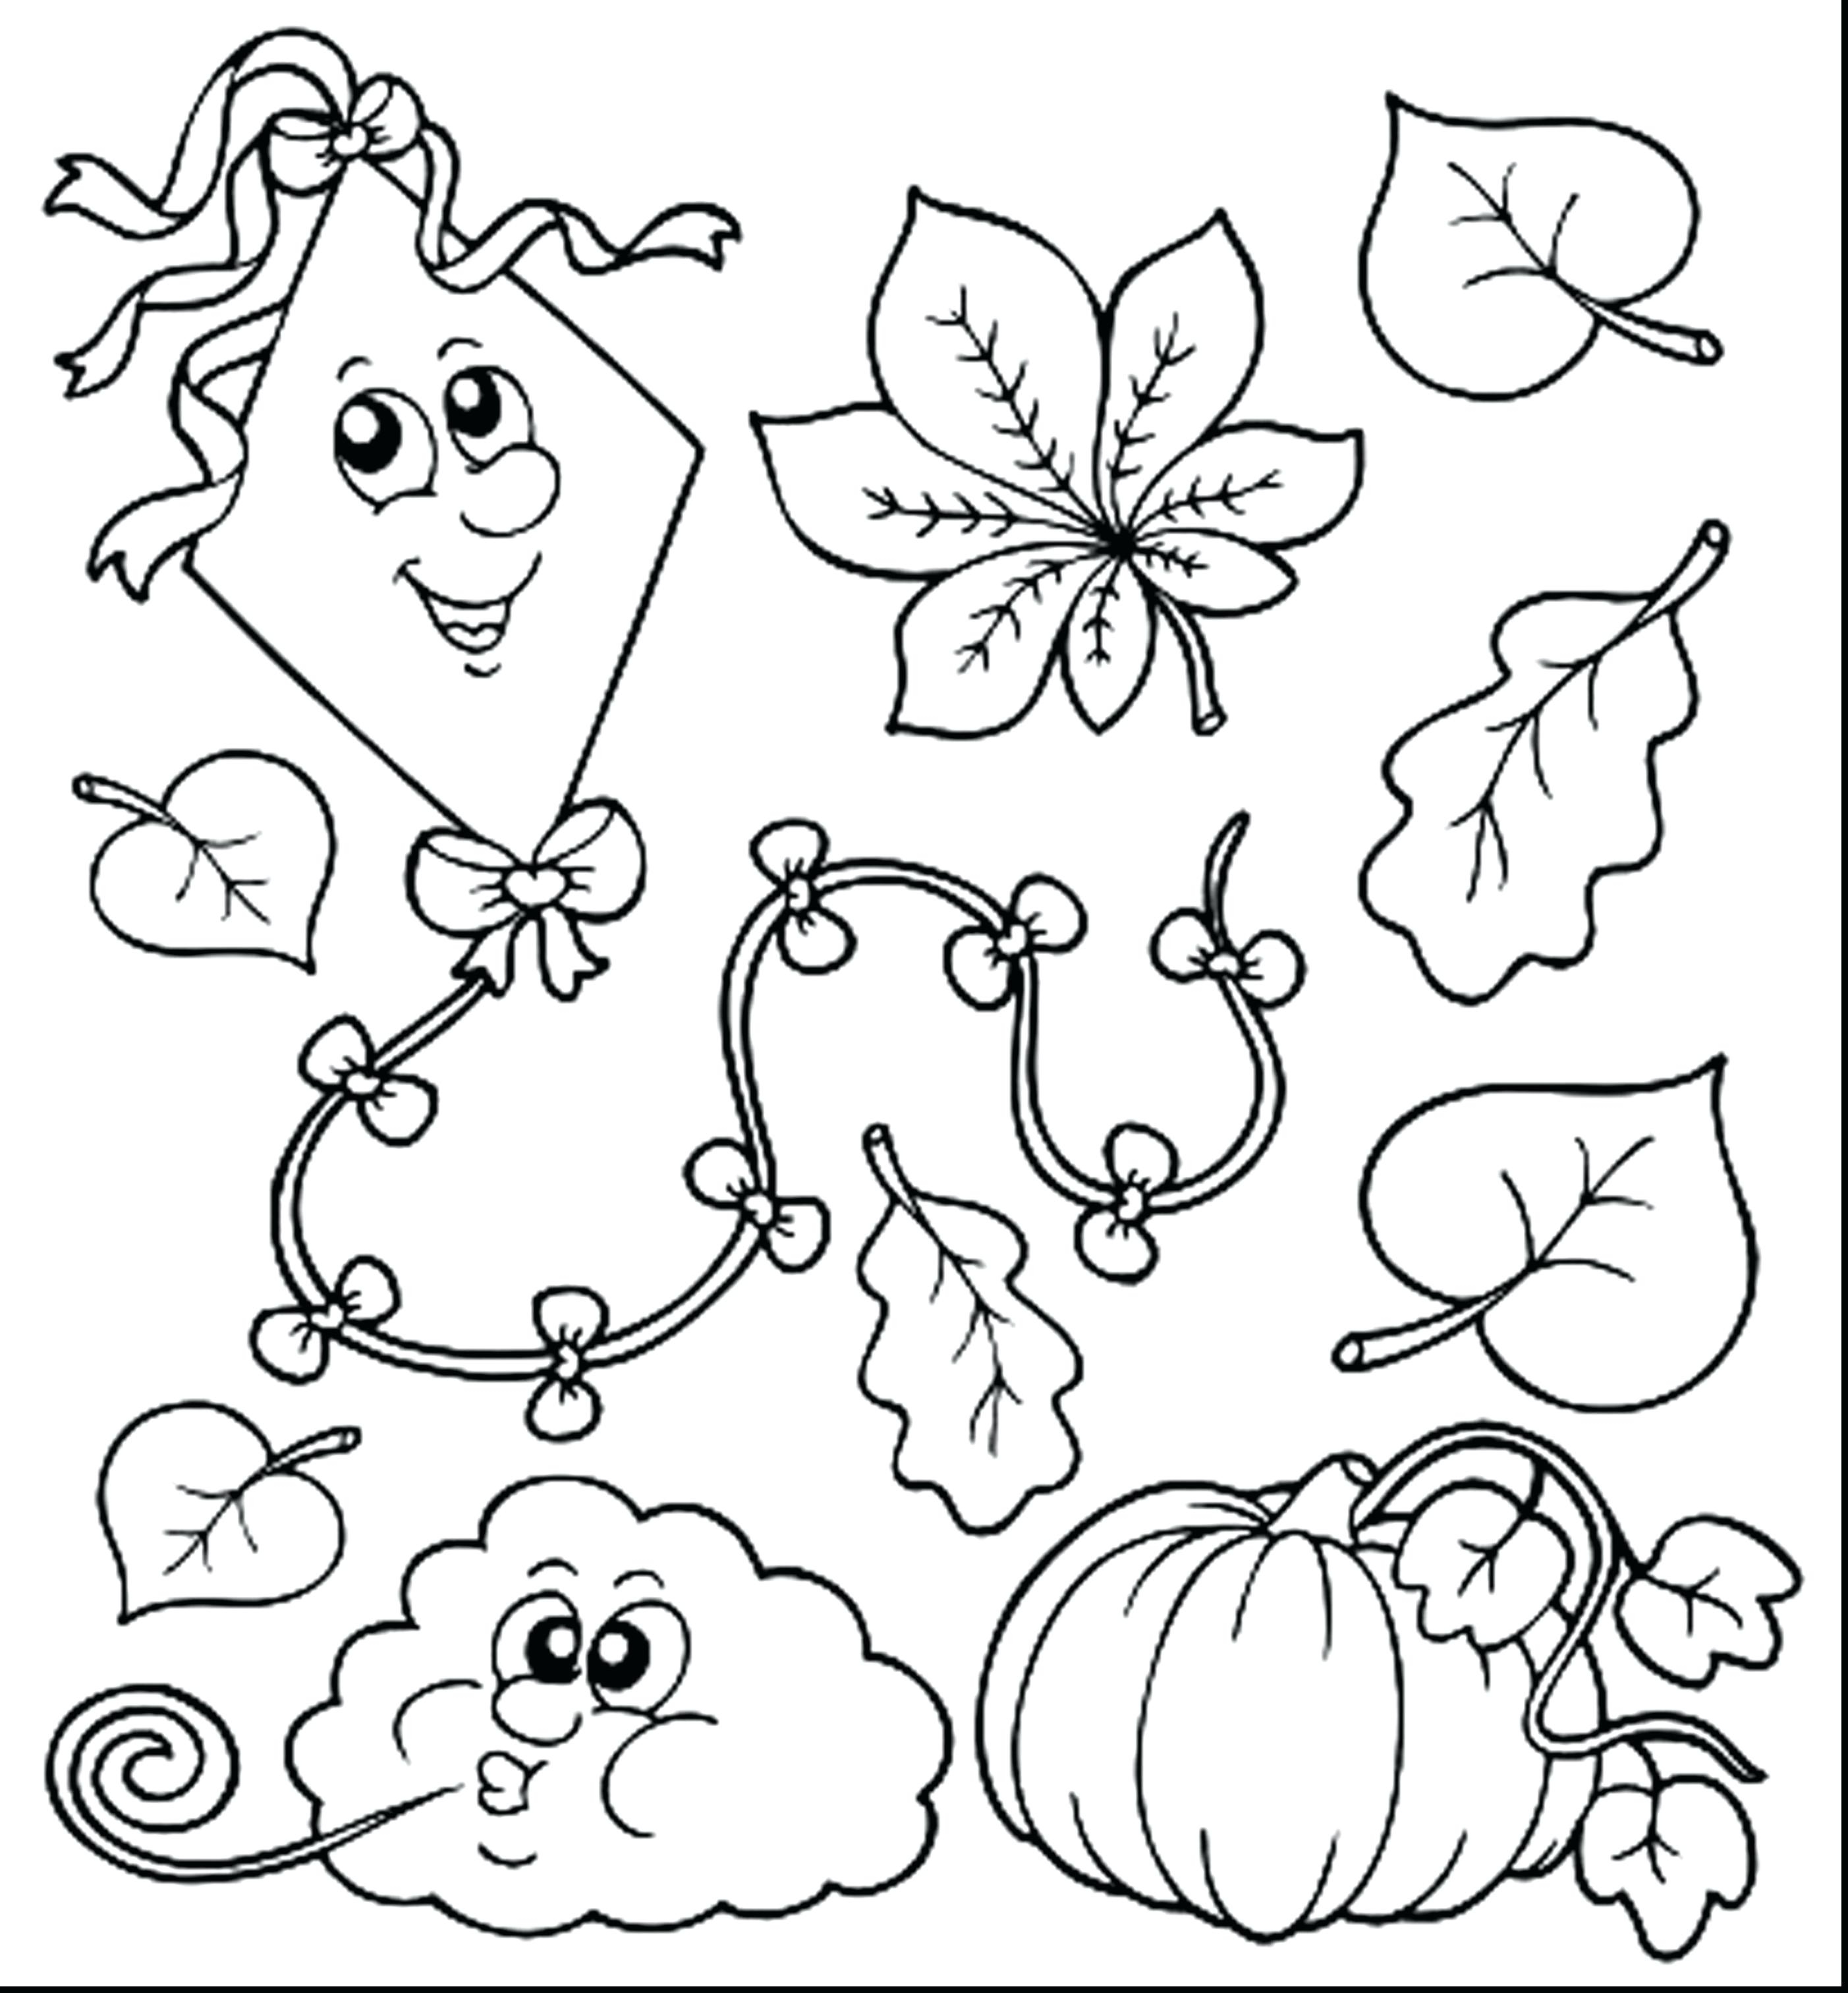 Free Christmas Coloring Pages For Elementary Students